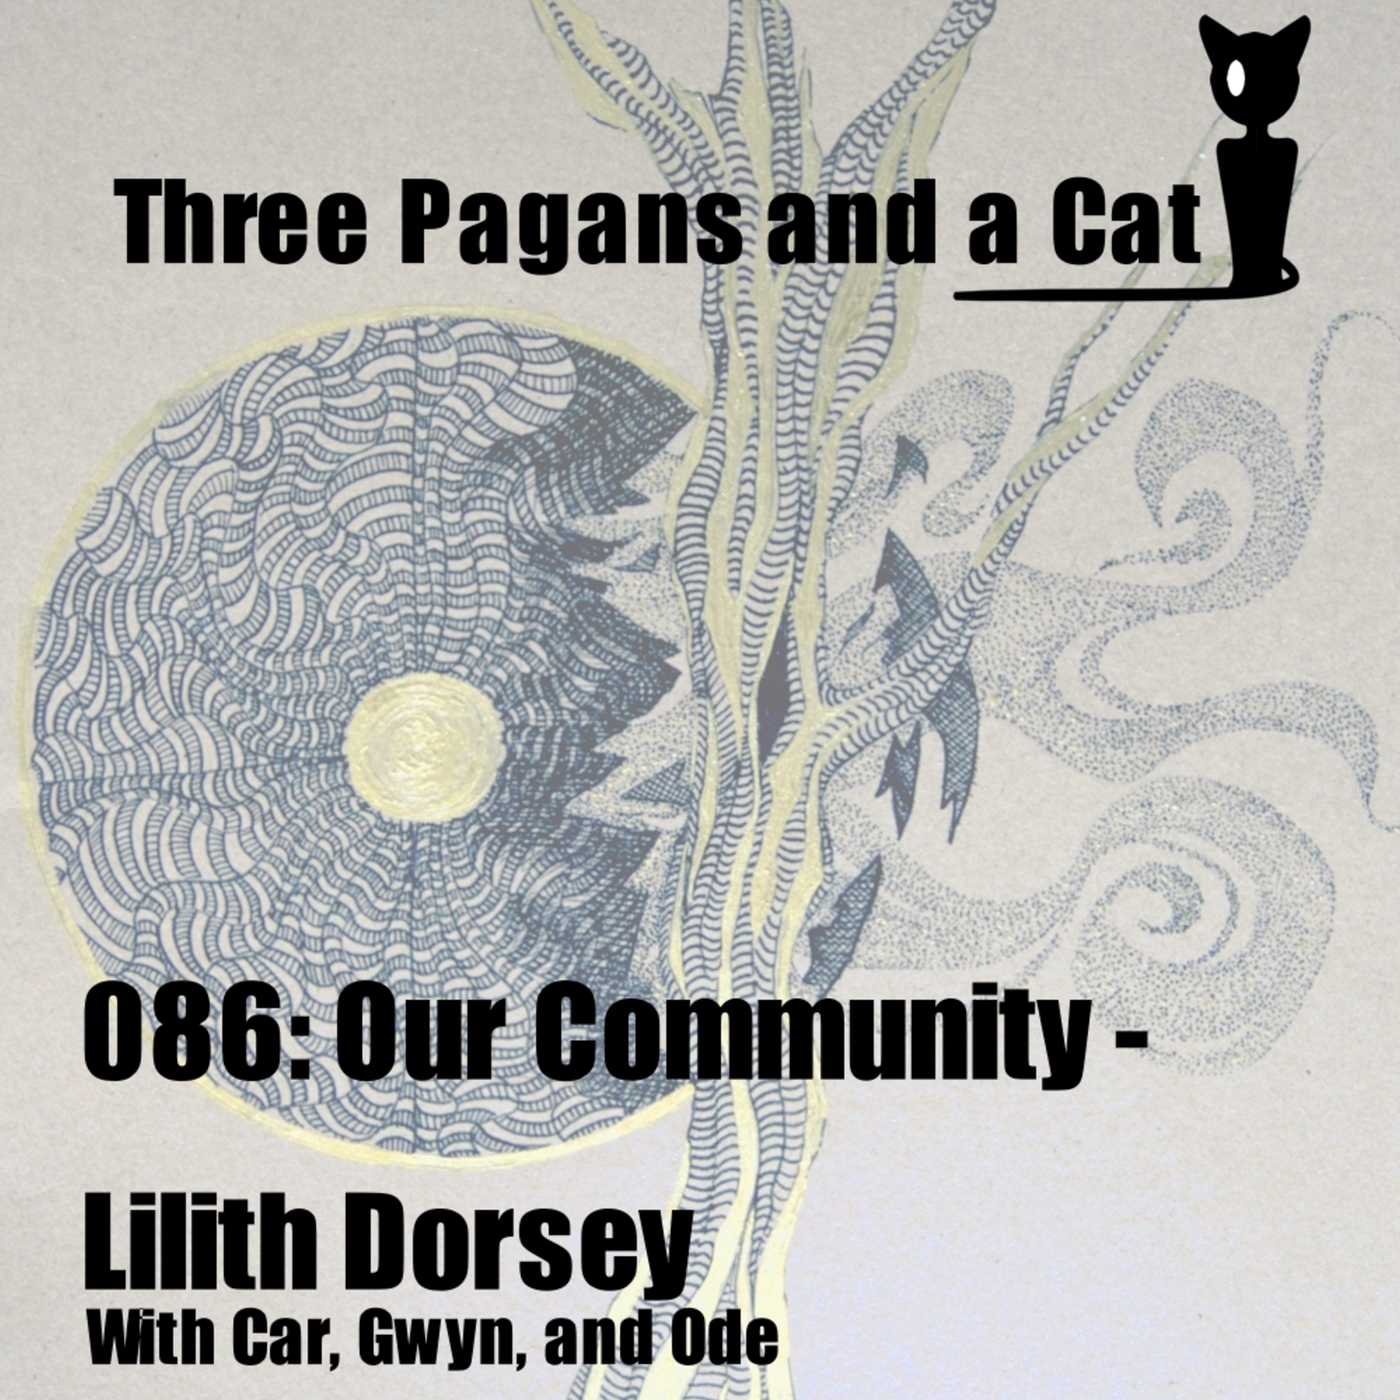 3 Pagans and a Cat